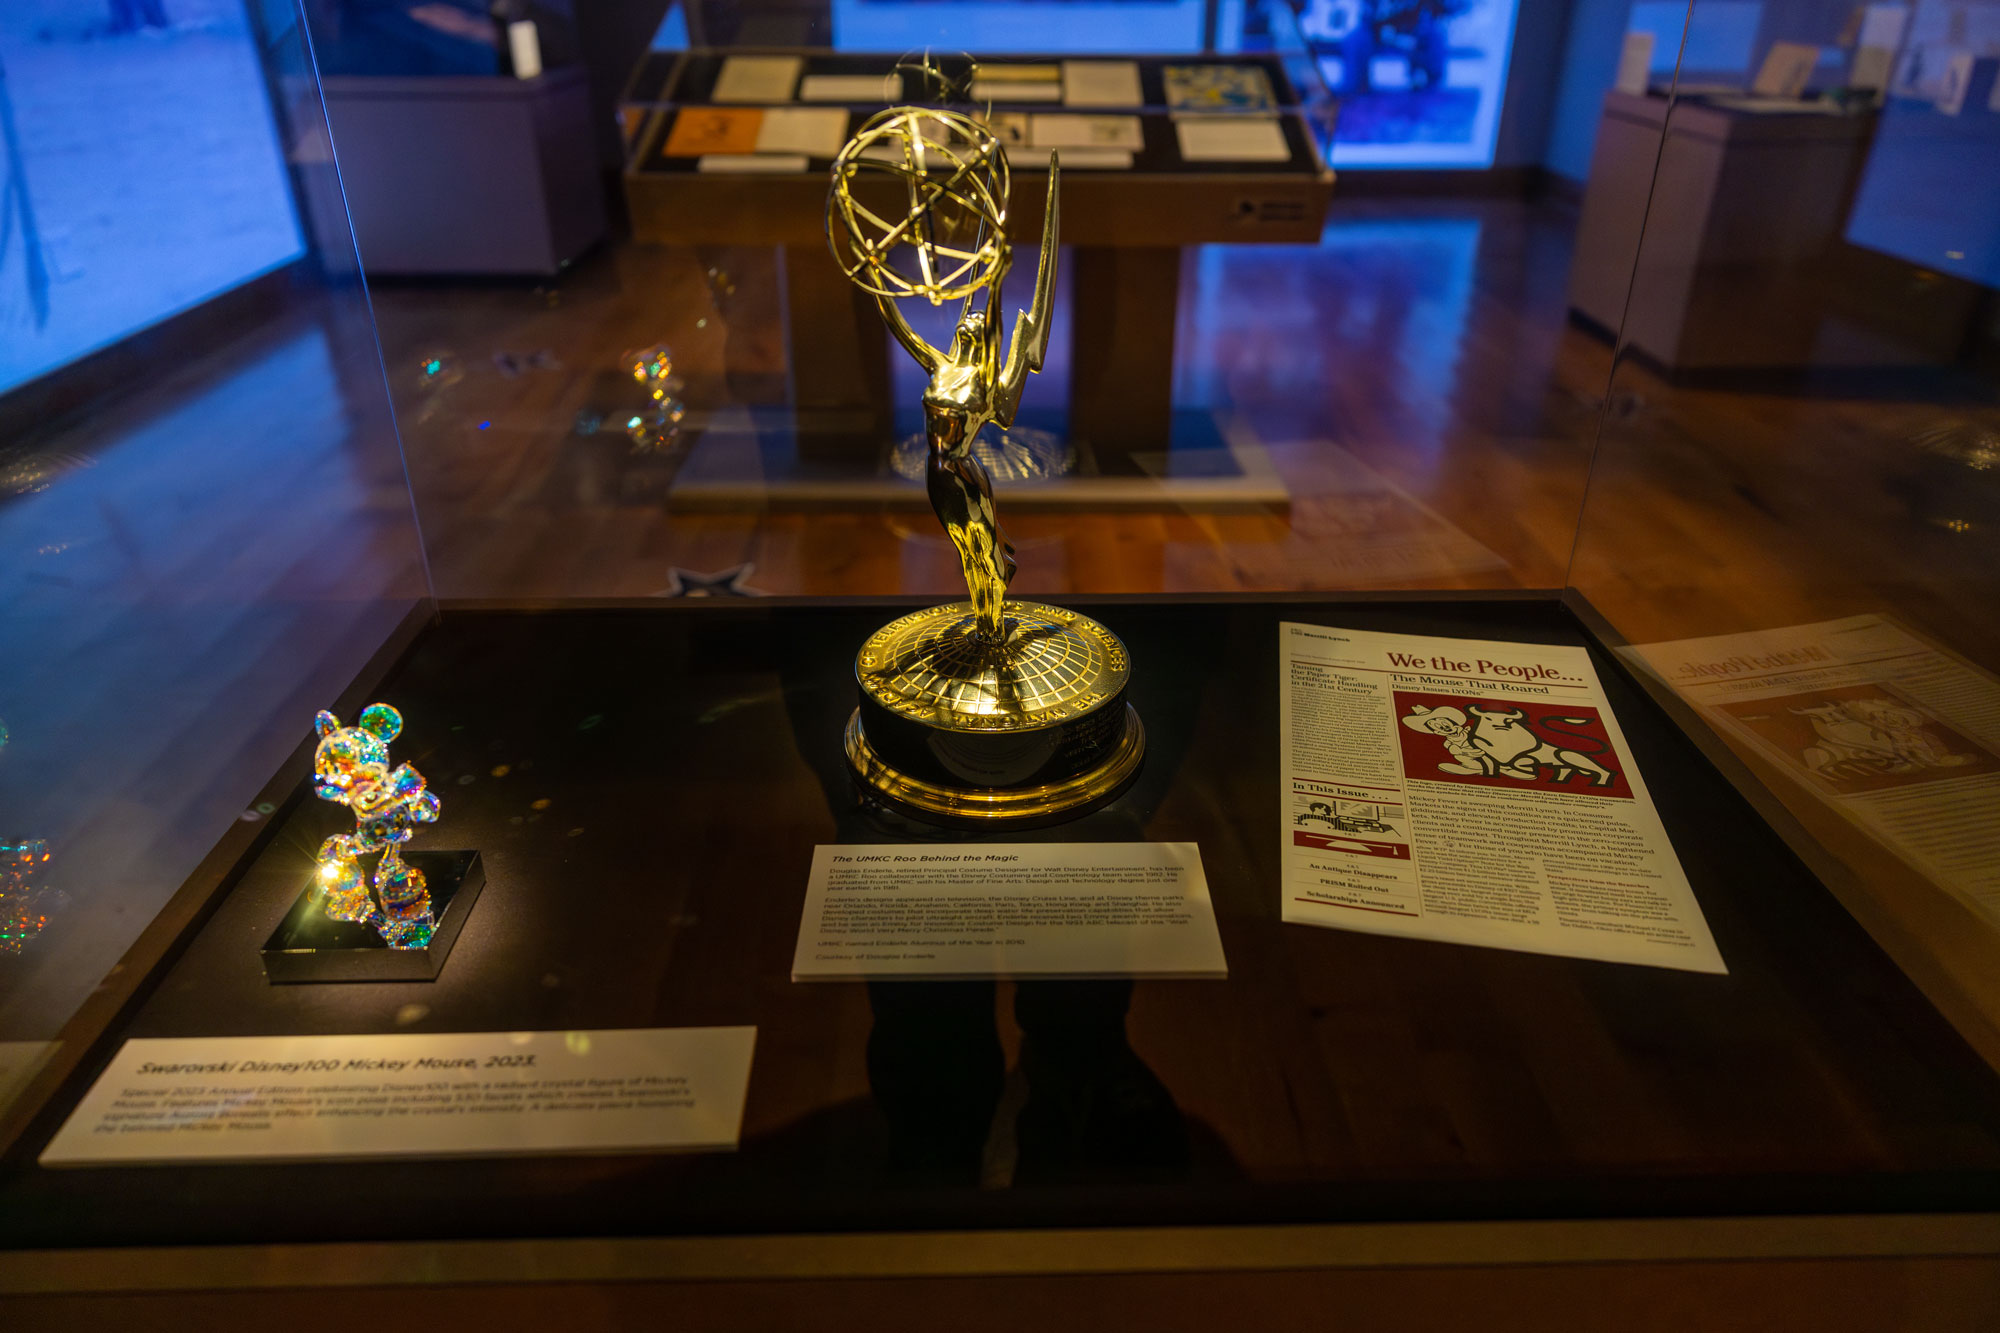 Artifacts at Disney 100 exhibit with connections to Kansas City